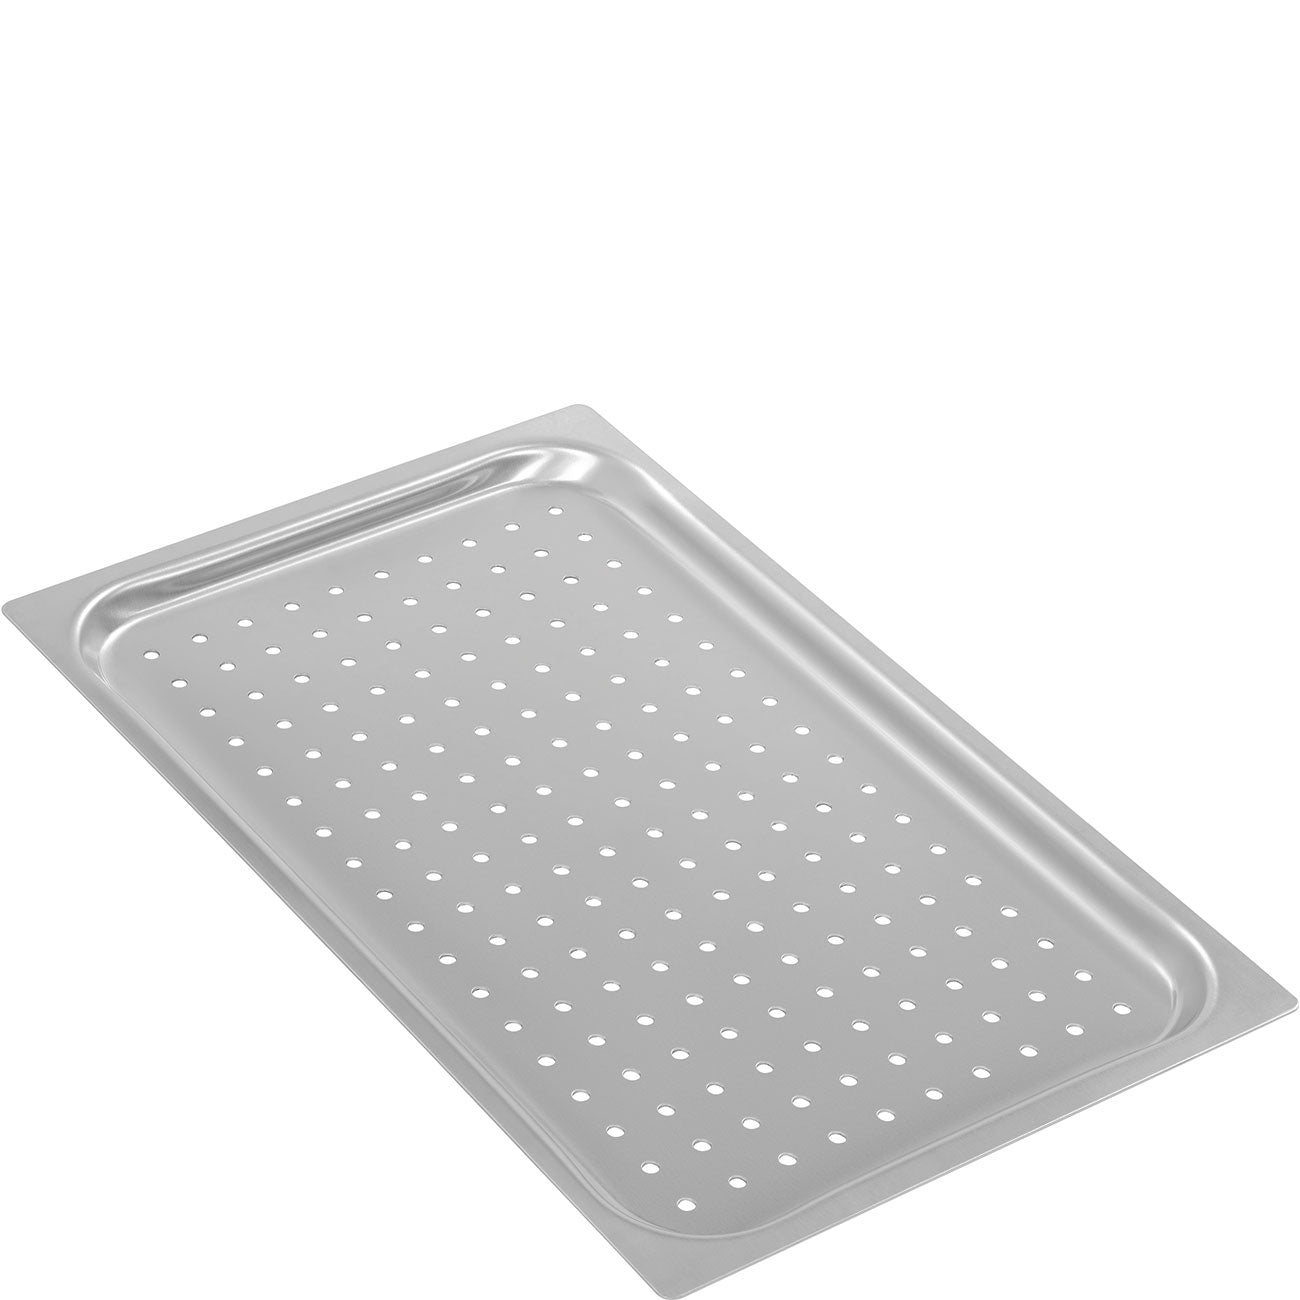 Smeg Oven Trays 1/1GN Flat Perforated Tray x 1 530mm x 325mm TF11XH2